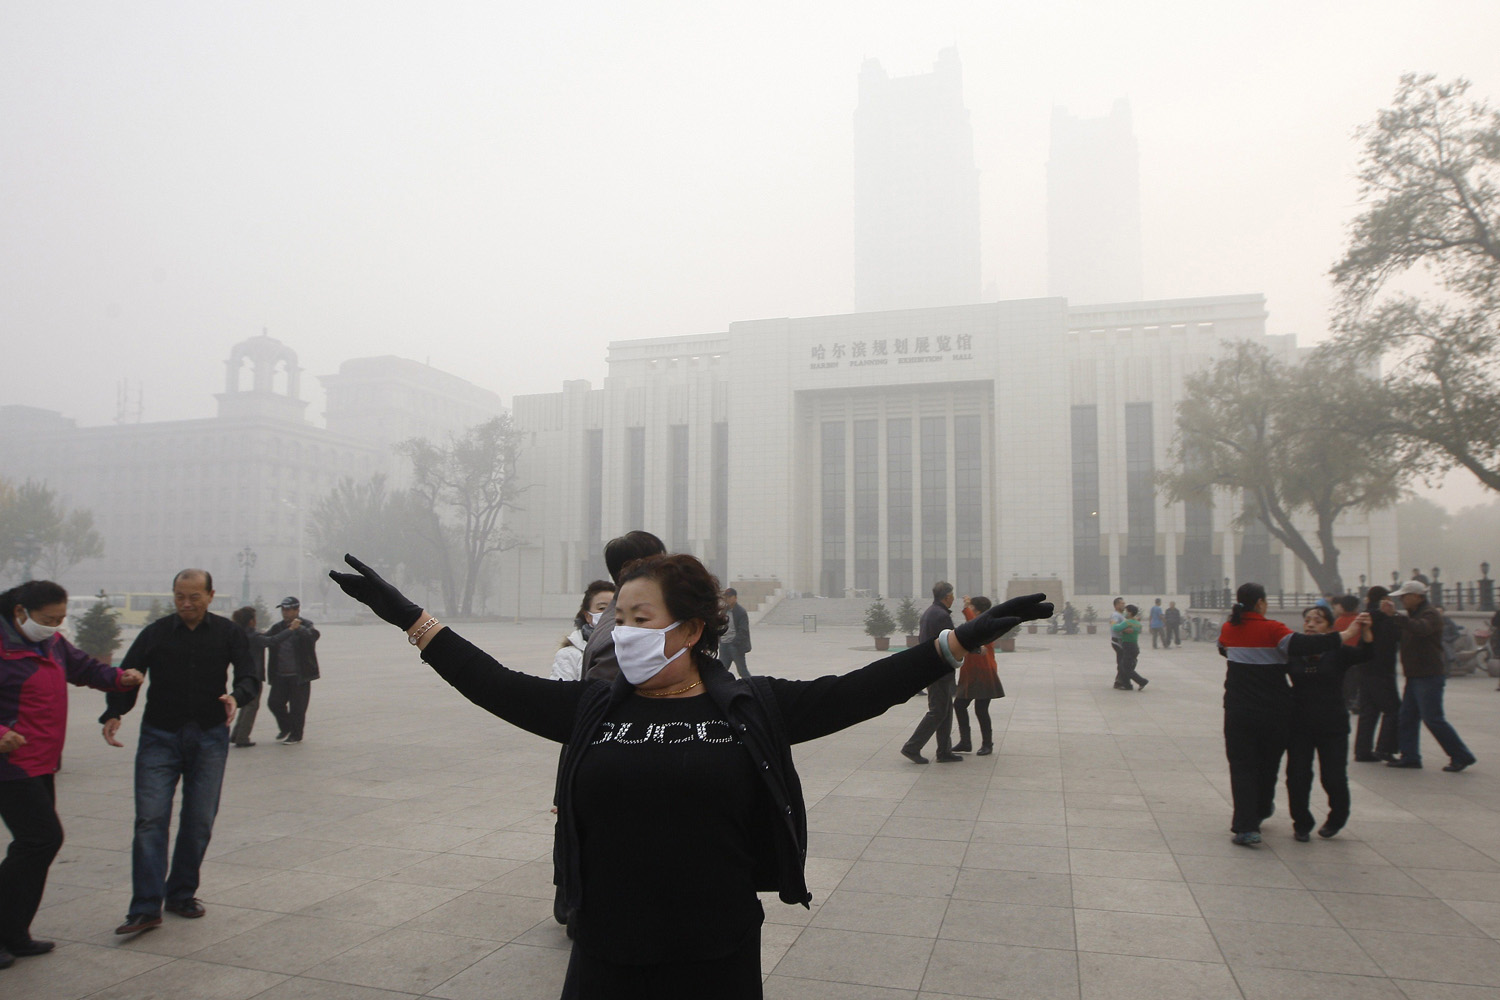 Oct. 21, 2013. Local residents dance on a square under heavy smog in Harbin, northeast China's Heilongjiang province.